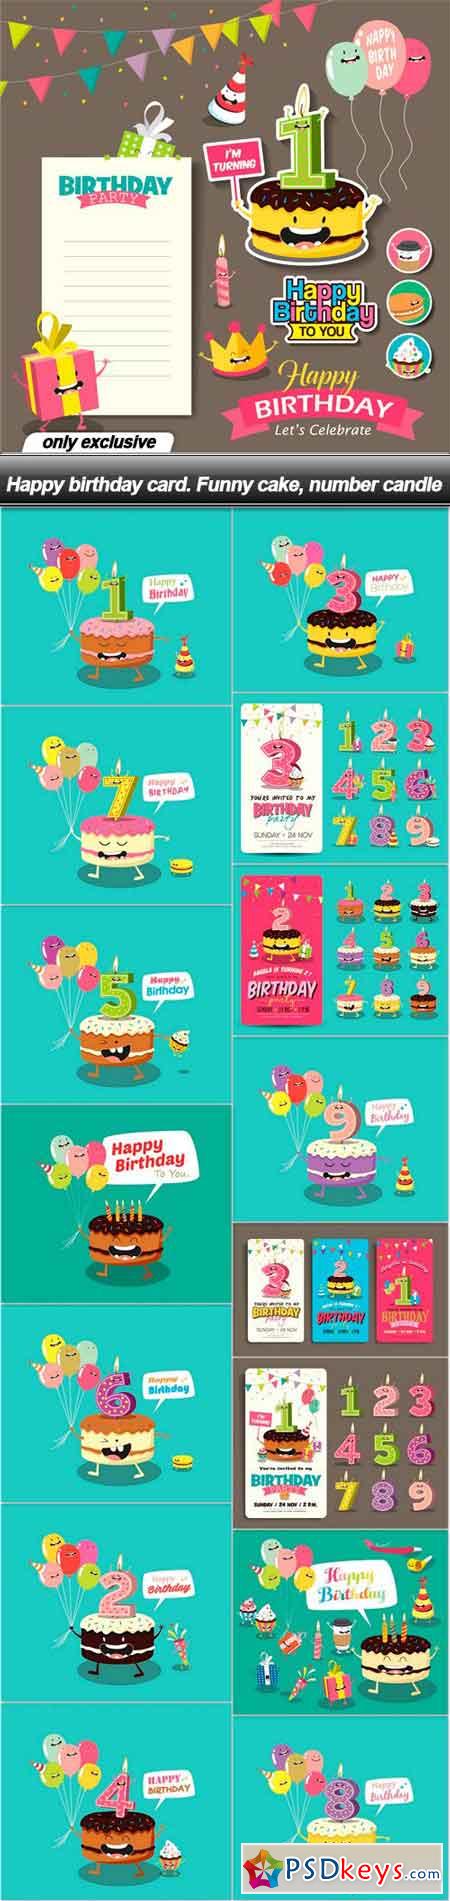 Happy birthday card. Funny cake, number candle - 16 EPS